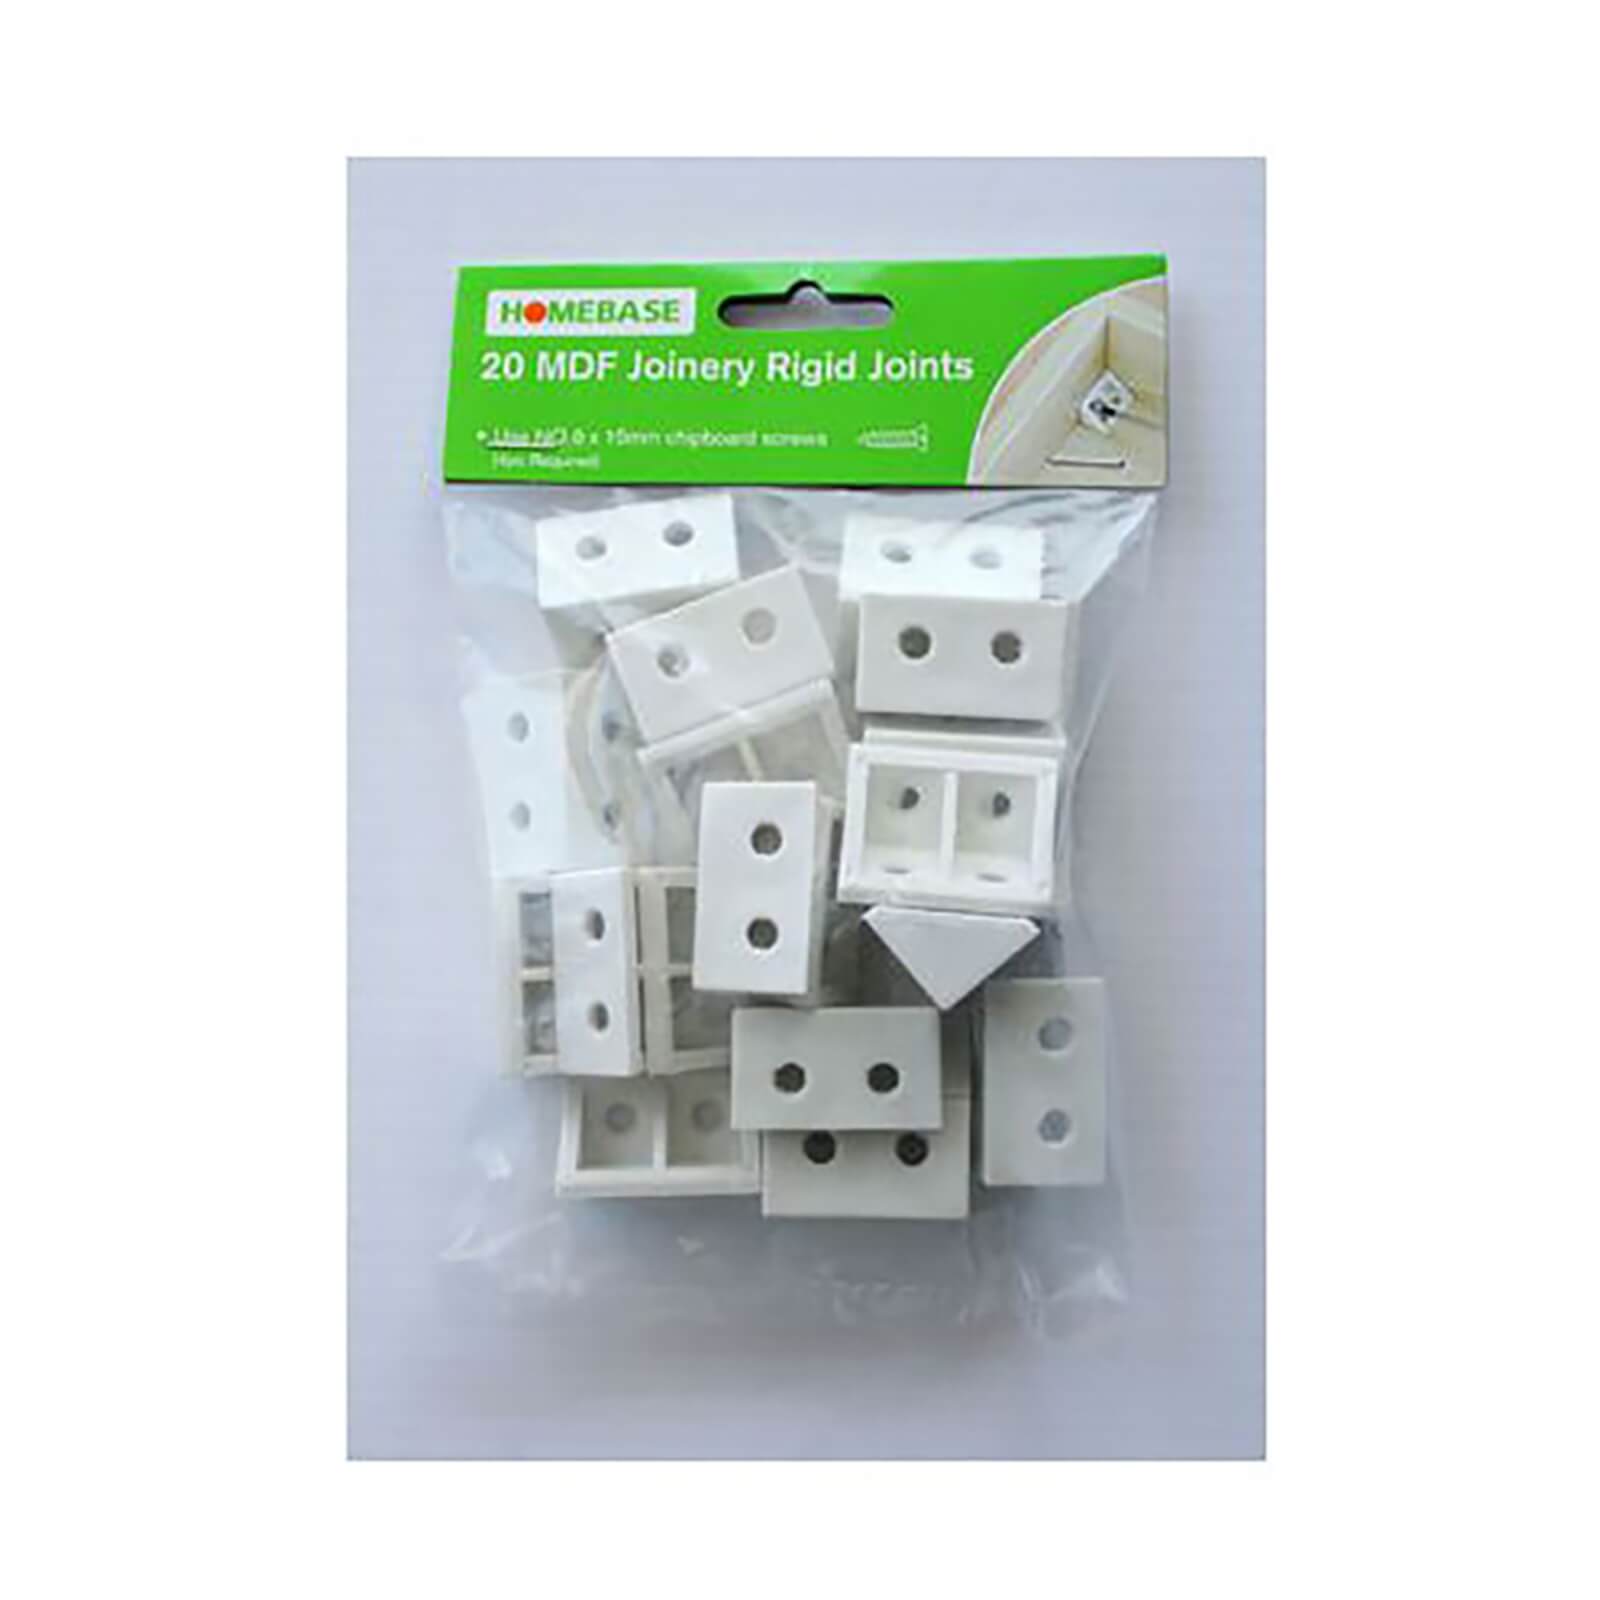 Photo of Mdf Joinery Rigid Joints - 20 Pack